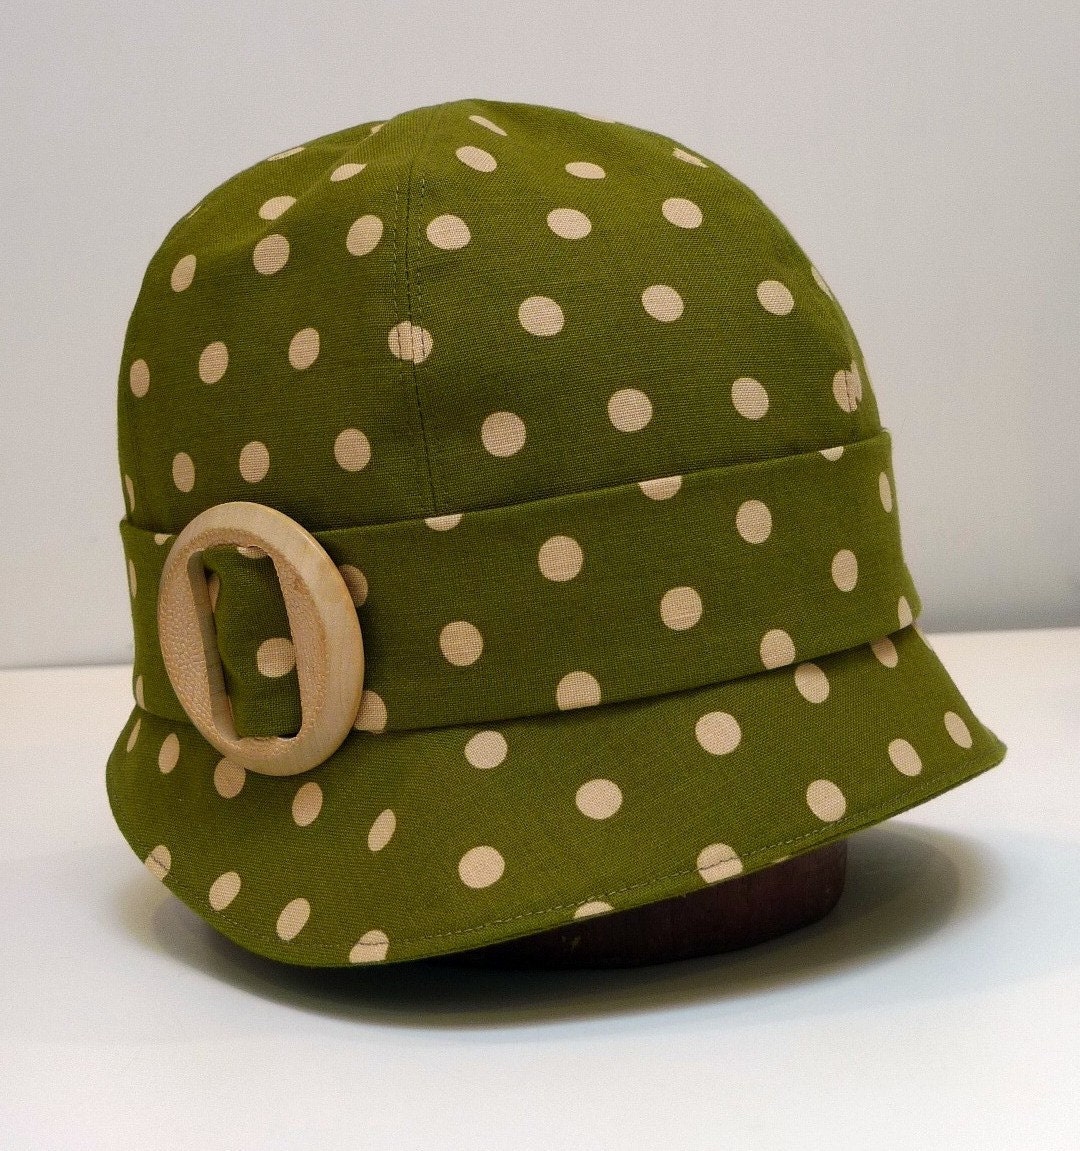 Cloche Hat - Olive Polka Dot Linen with Vintage Wooden Buckle - Made to Order